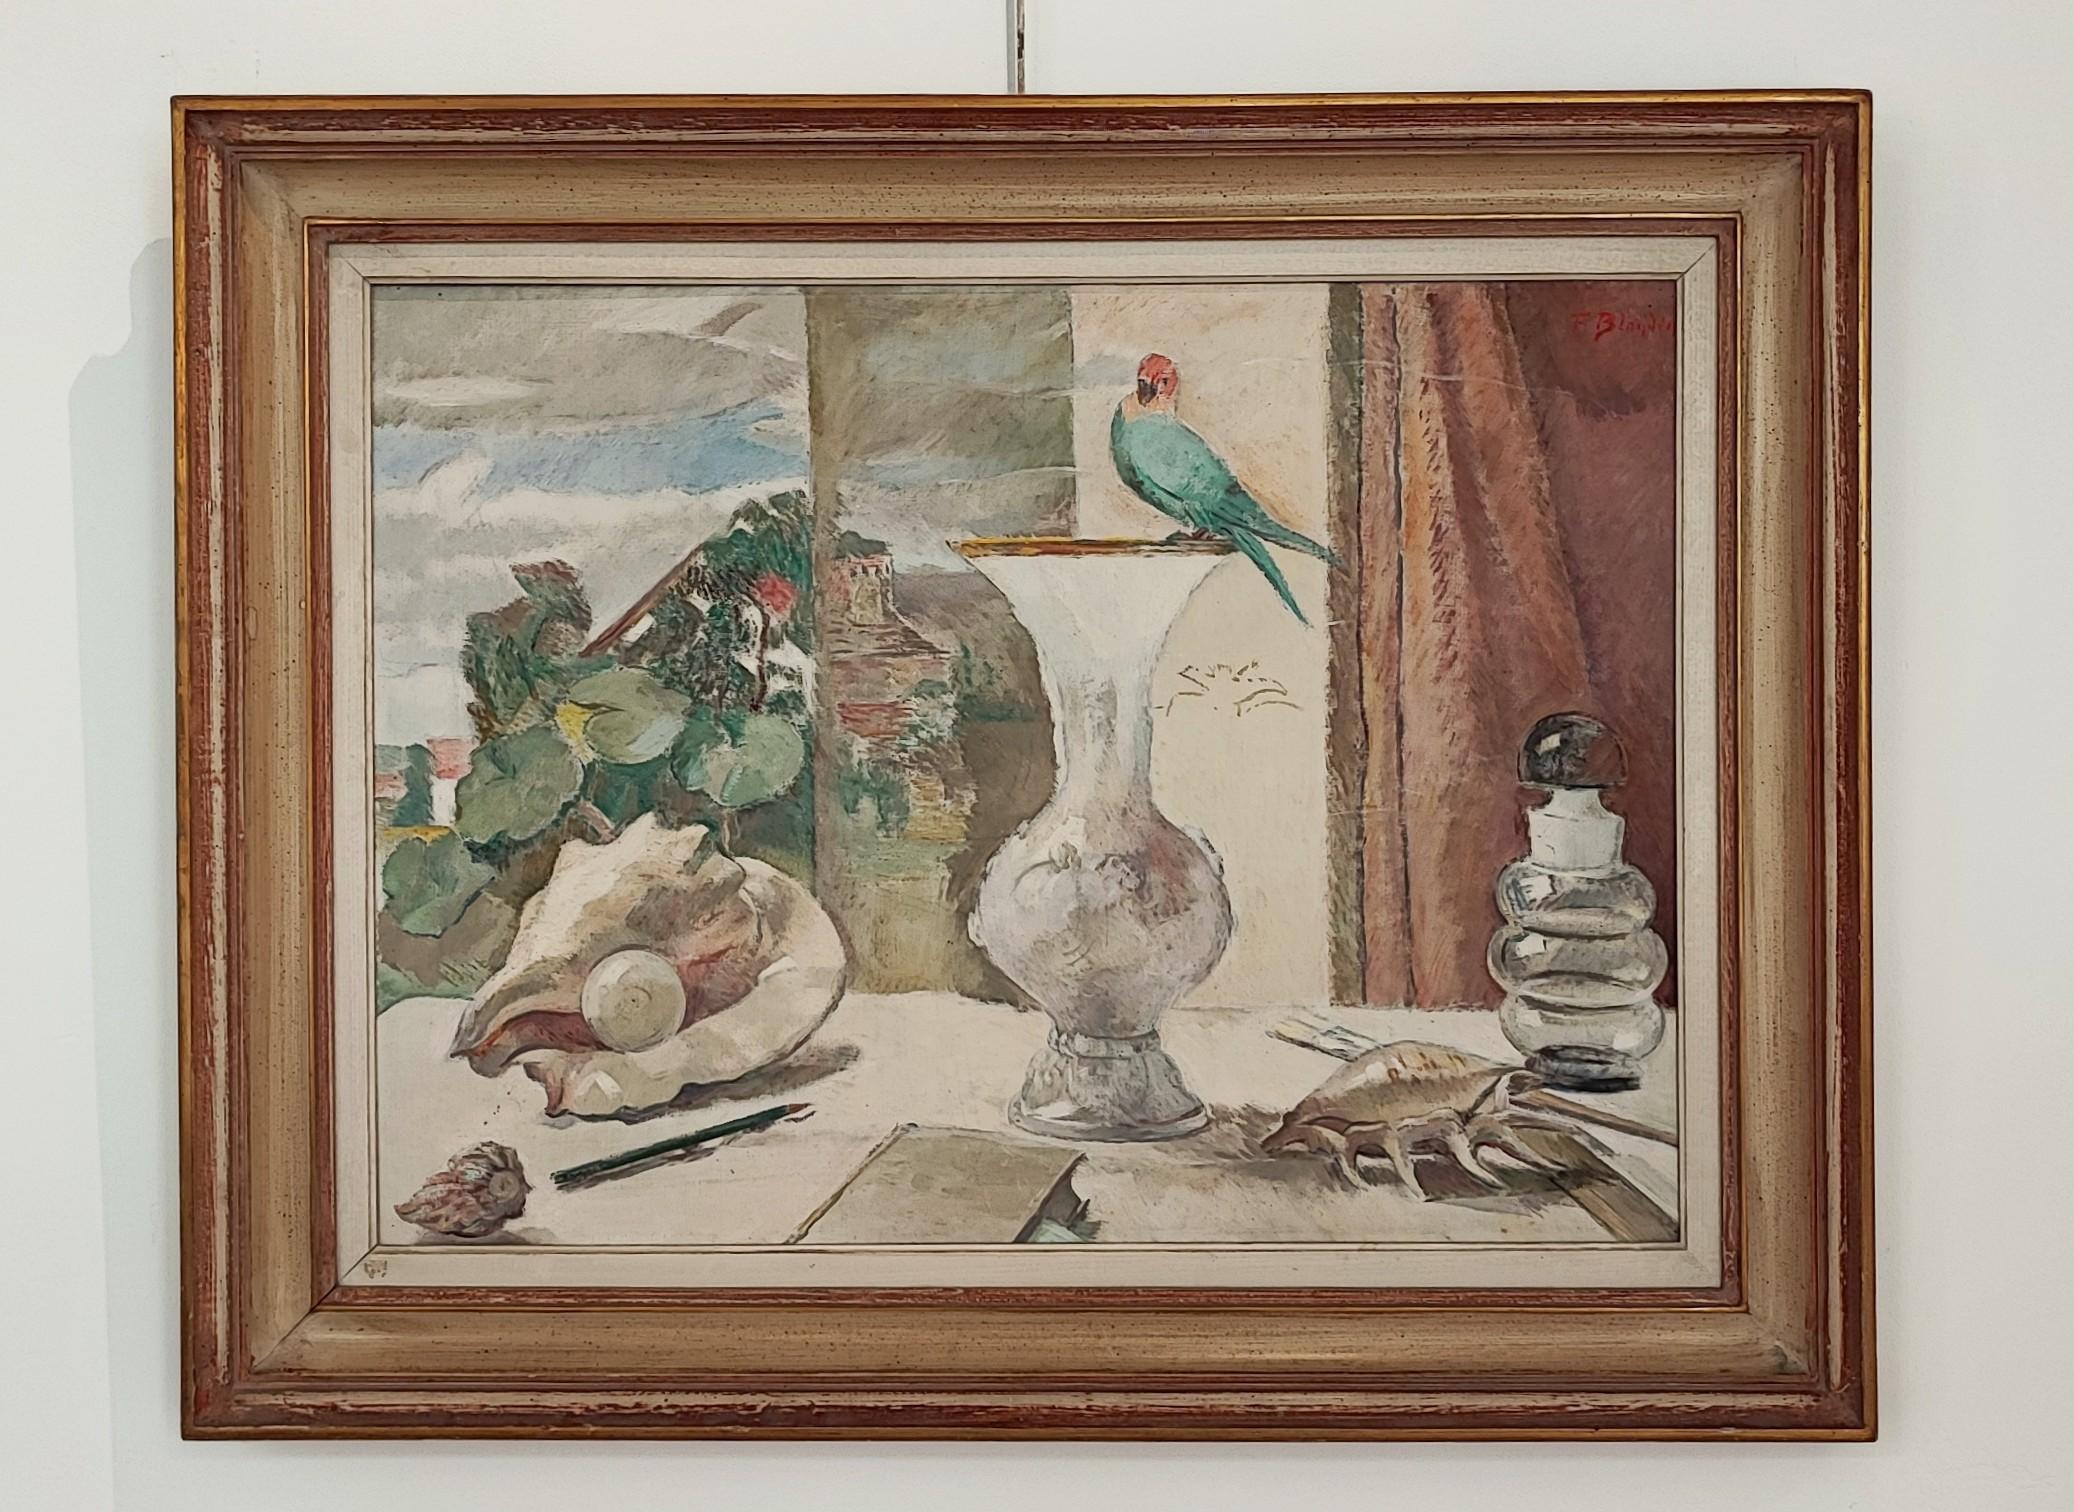 Parakeet in an interior with vase and shells - Painting by Fernand Blondin